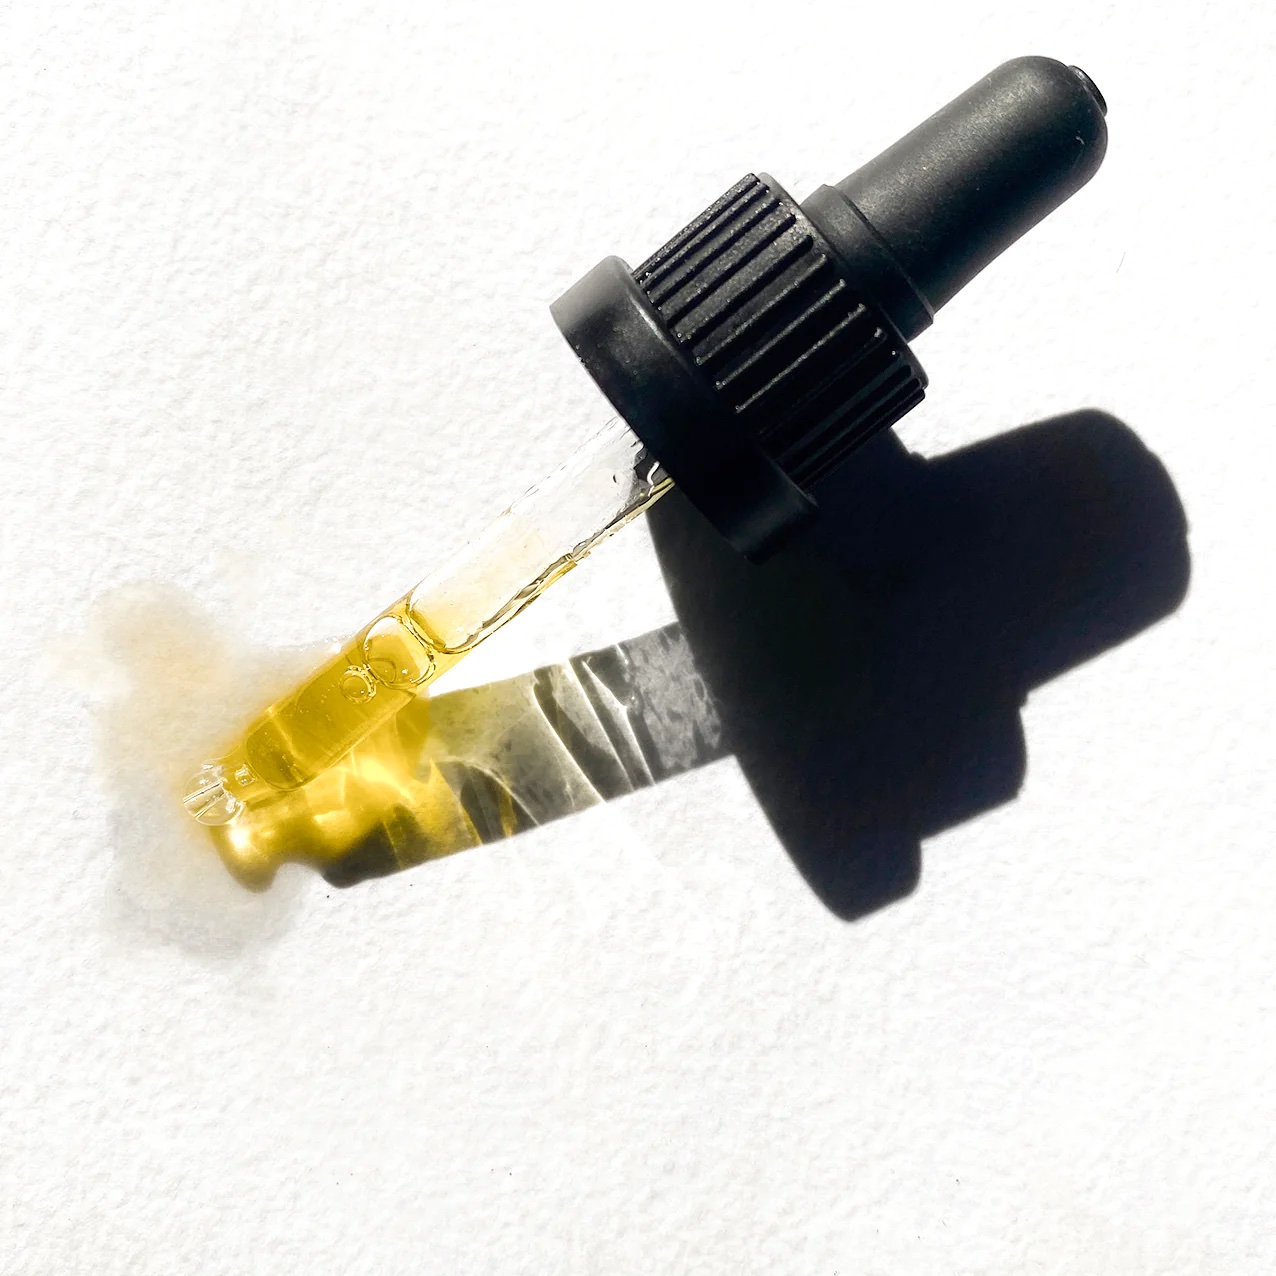 A dropper with some golden serum in it sits on a white surface.